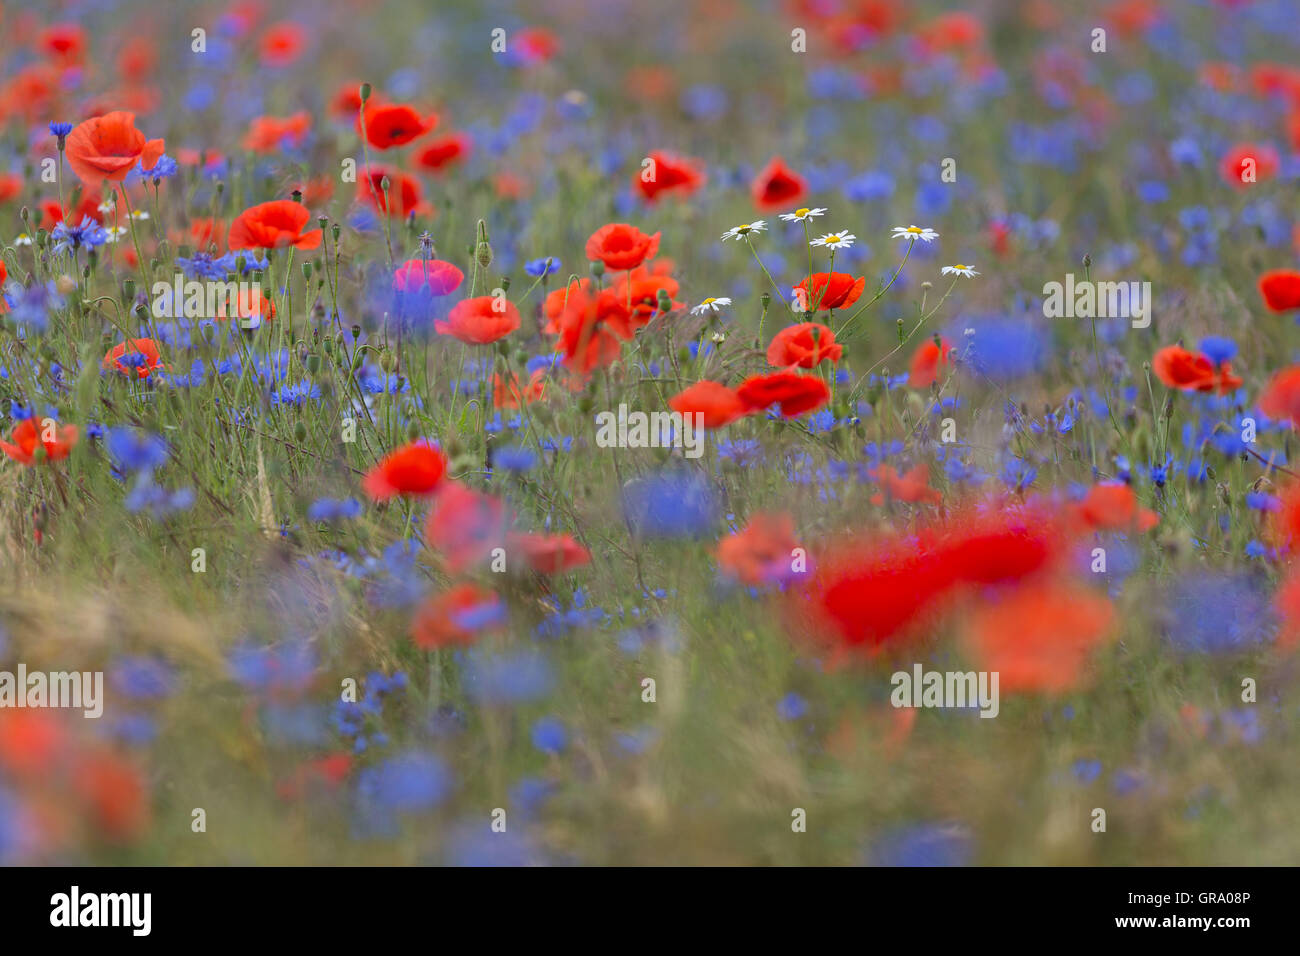 Poppy And Bluebottles And Camomile In A Field Stock Photo